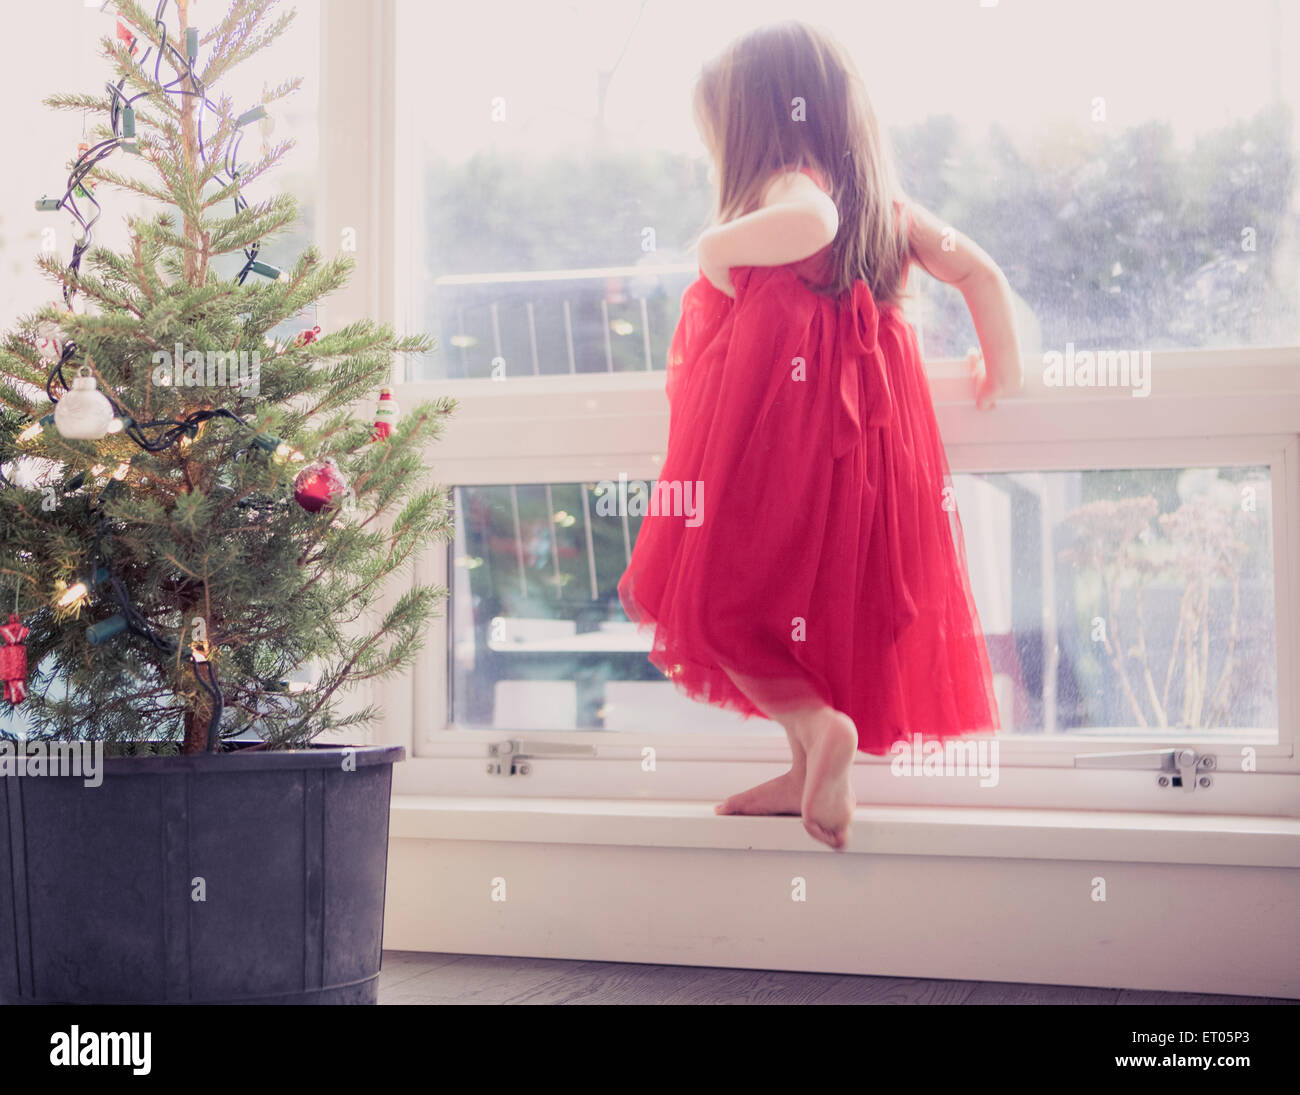 Girl in red dress on ledge next to potted Christmas tree Stock Photo